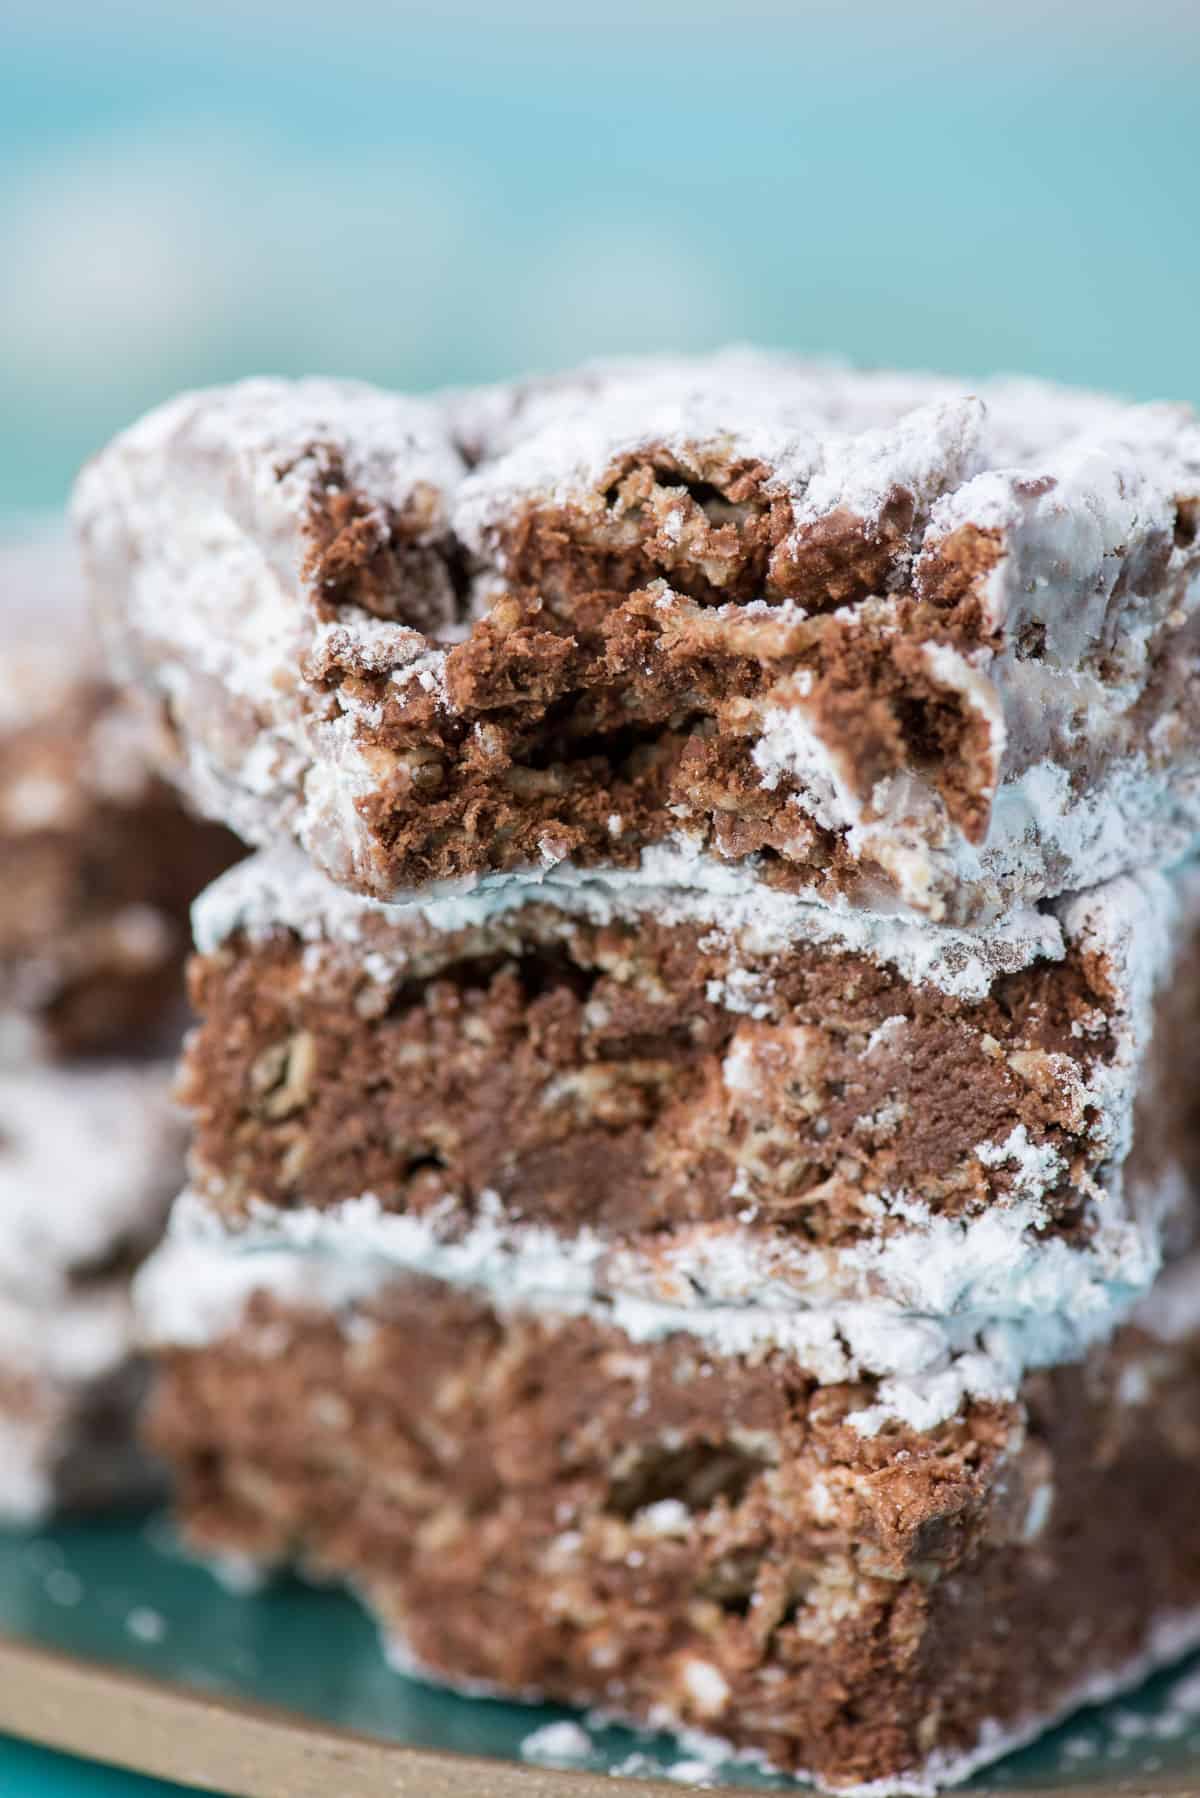 three puppy chow bars stacked on top of each other with teal background